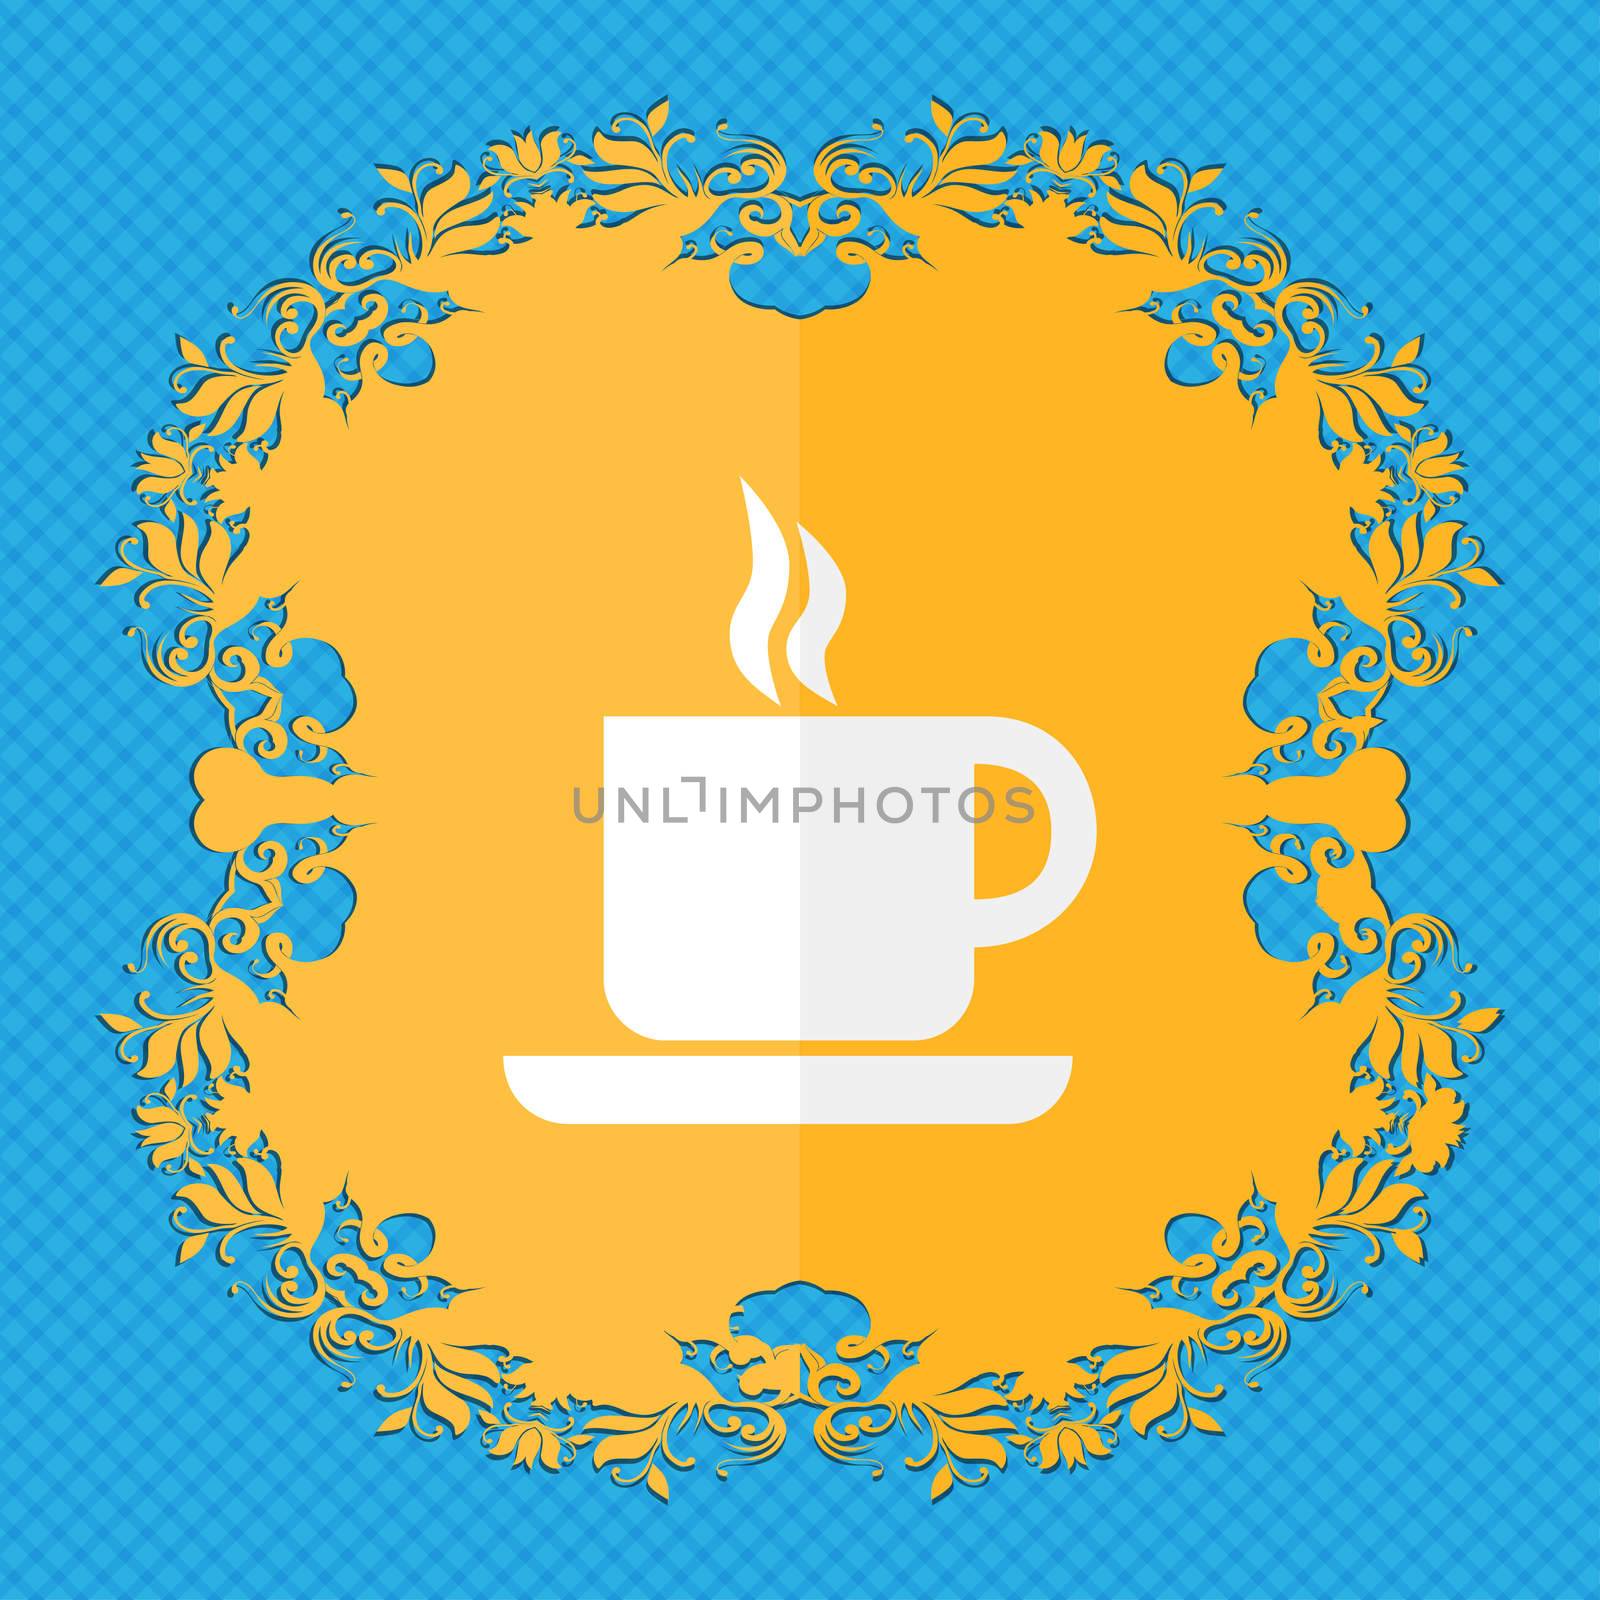 coffee. Floral flat design on a blue abstract background with place for your text. illustration